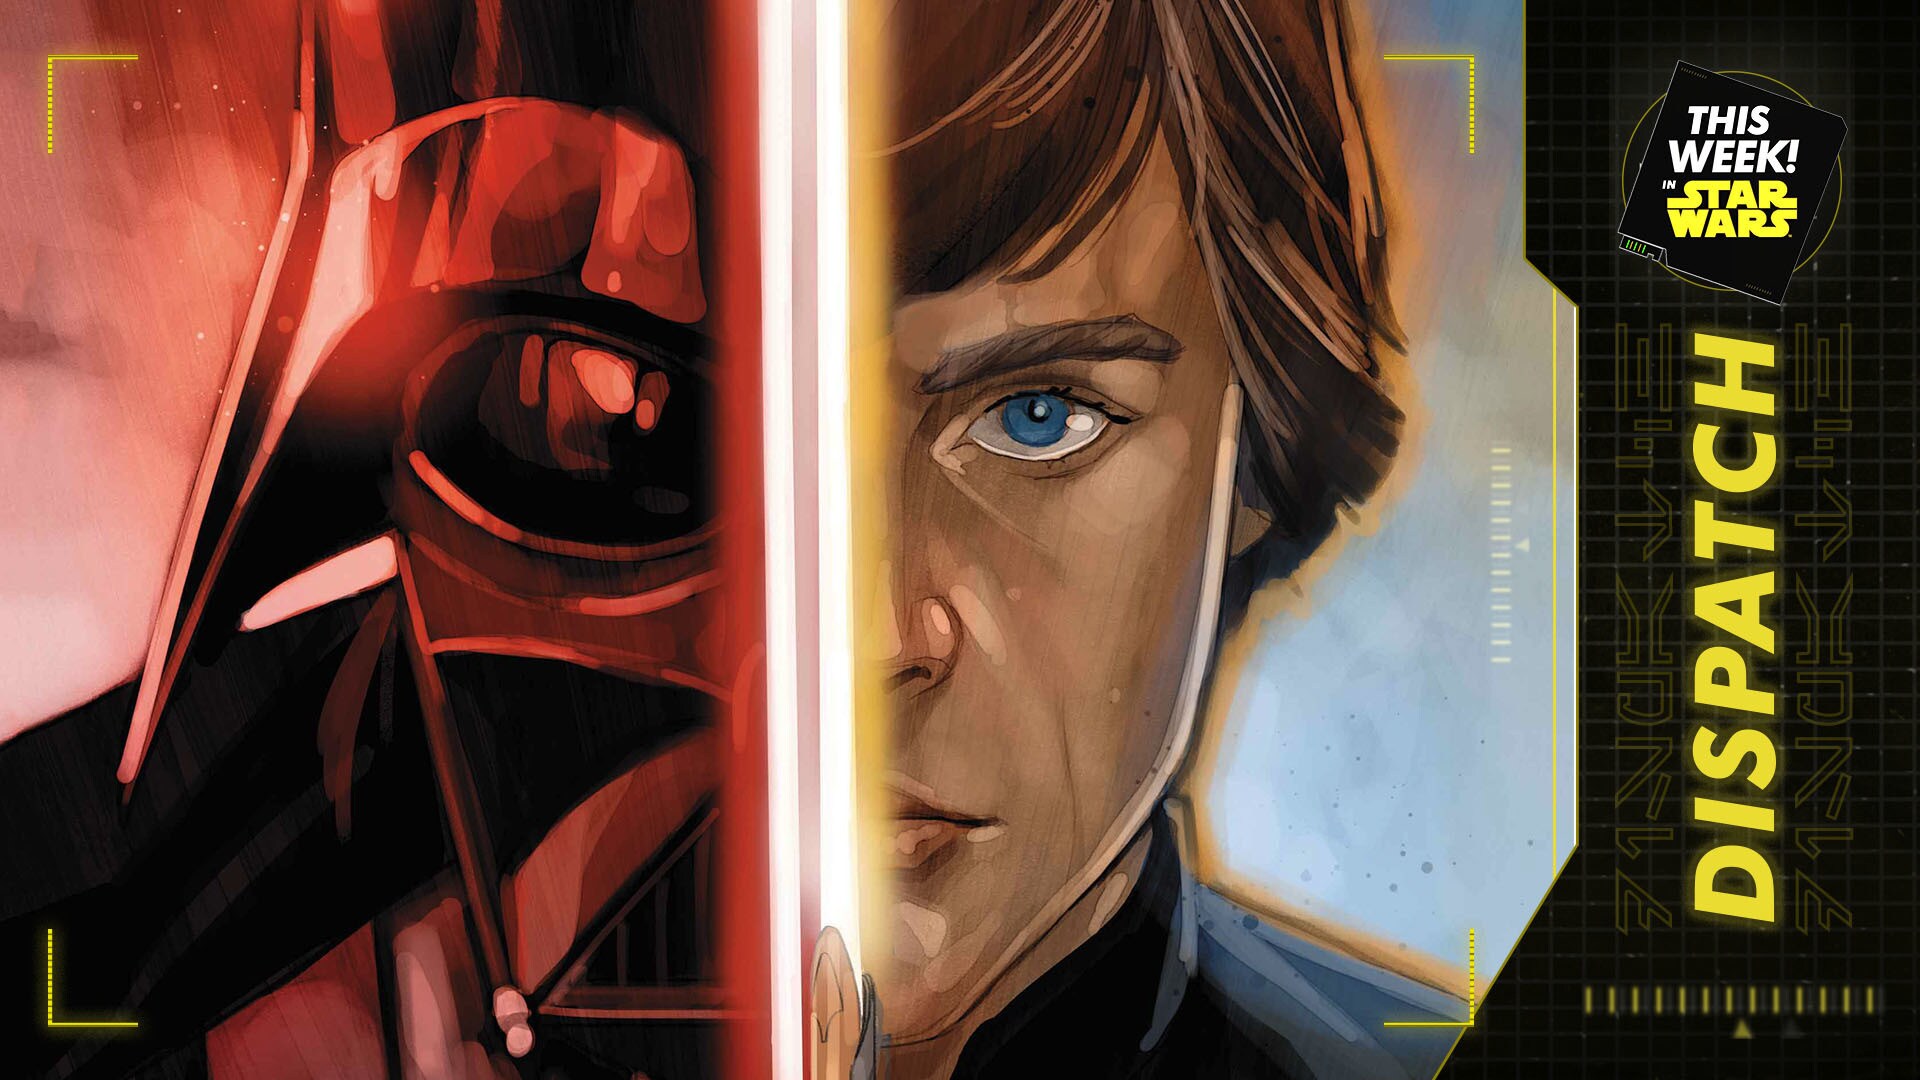 Star Wars on Free Comic Book Day | This Week! in Star Wars Dispatch thumbnail